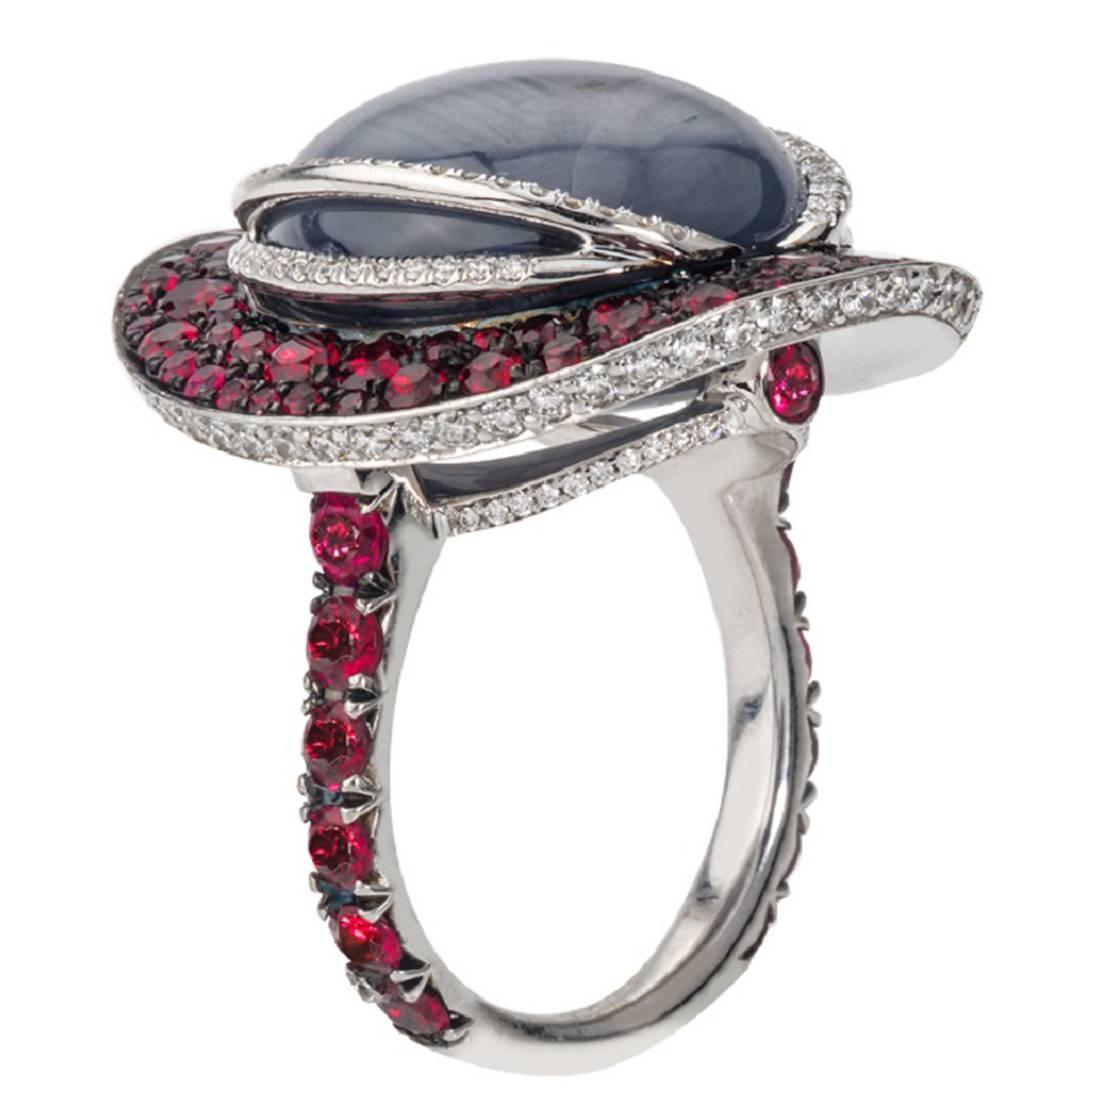 Grey Star Sapphire Red Spinel Ruby Diamond Gold Ring For Sale at 1stdibs